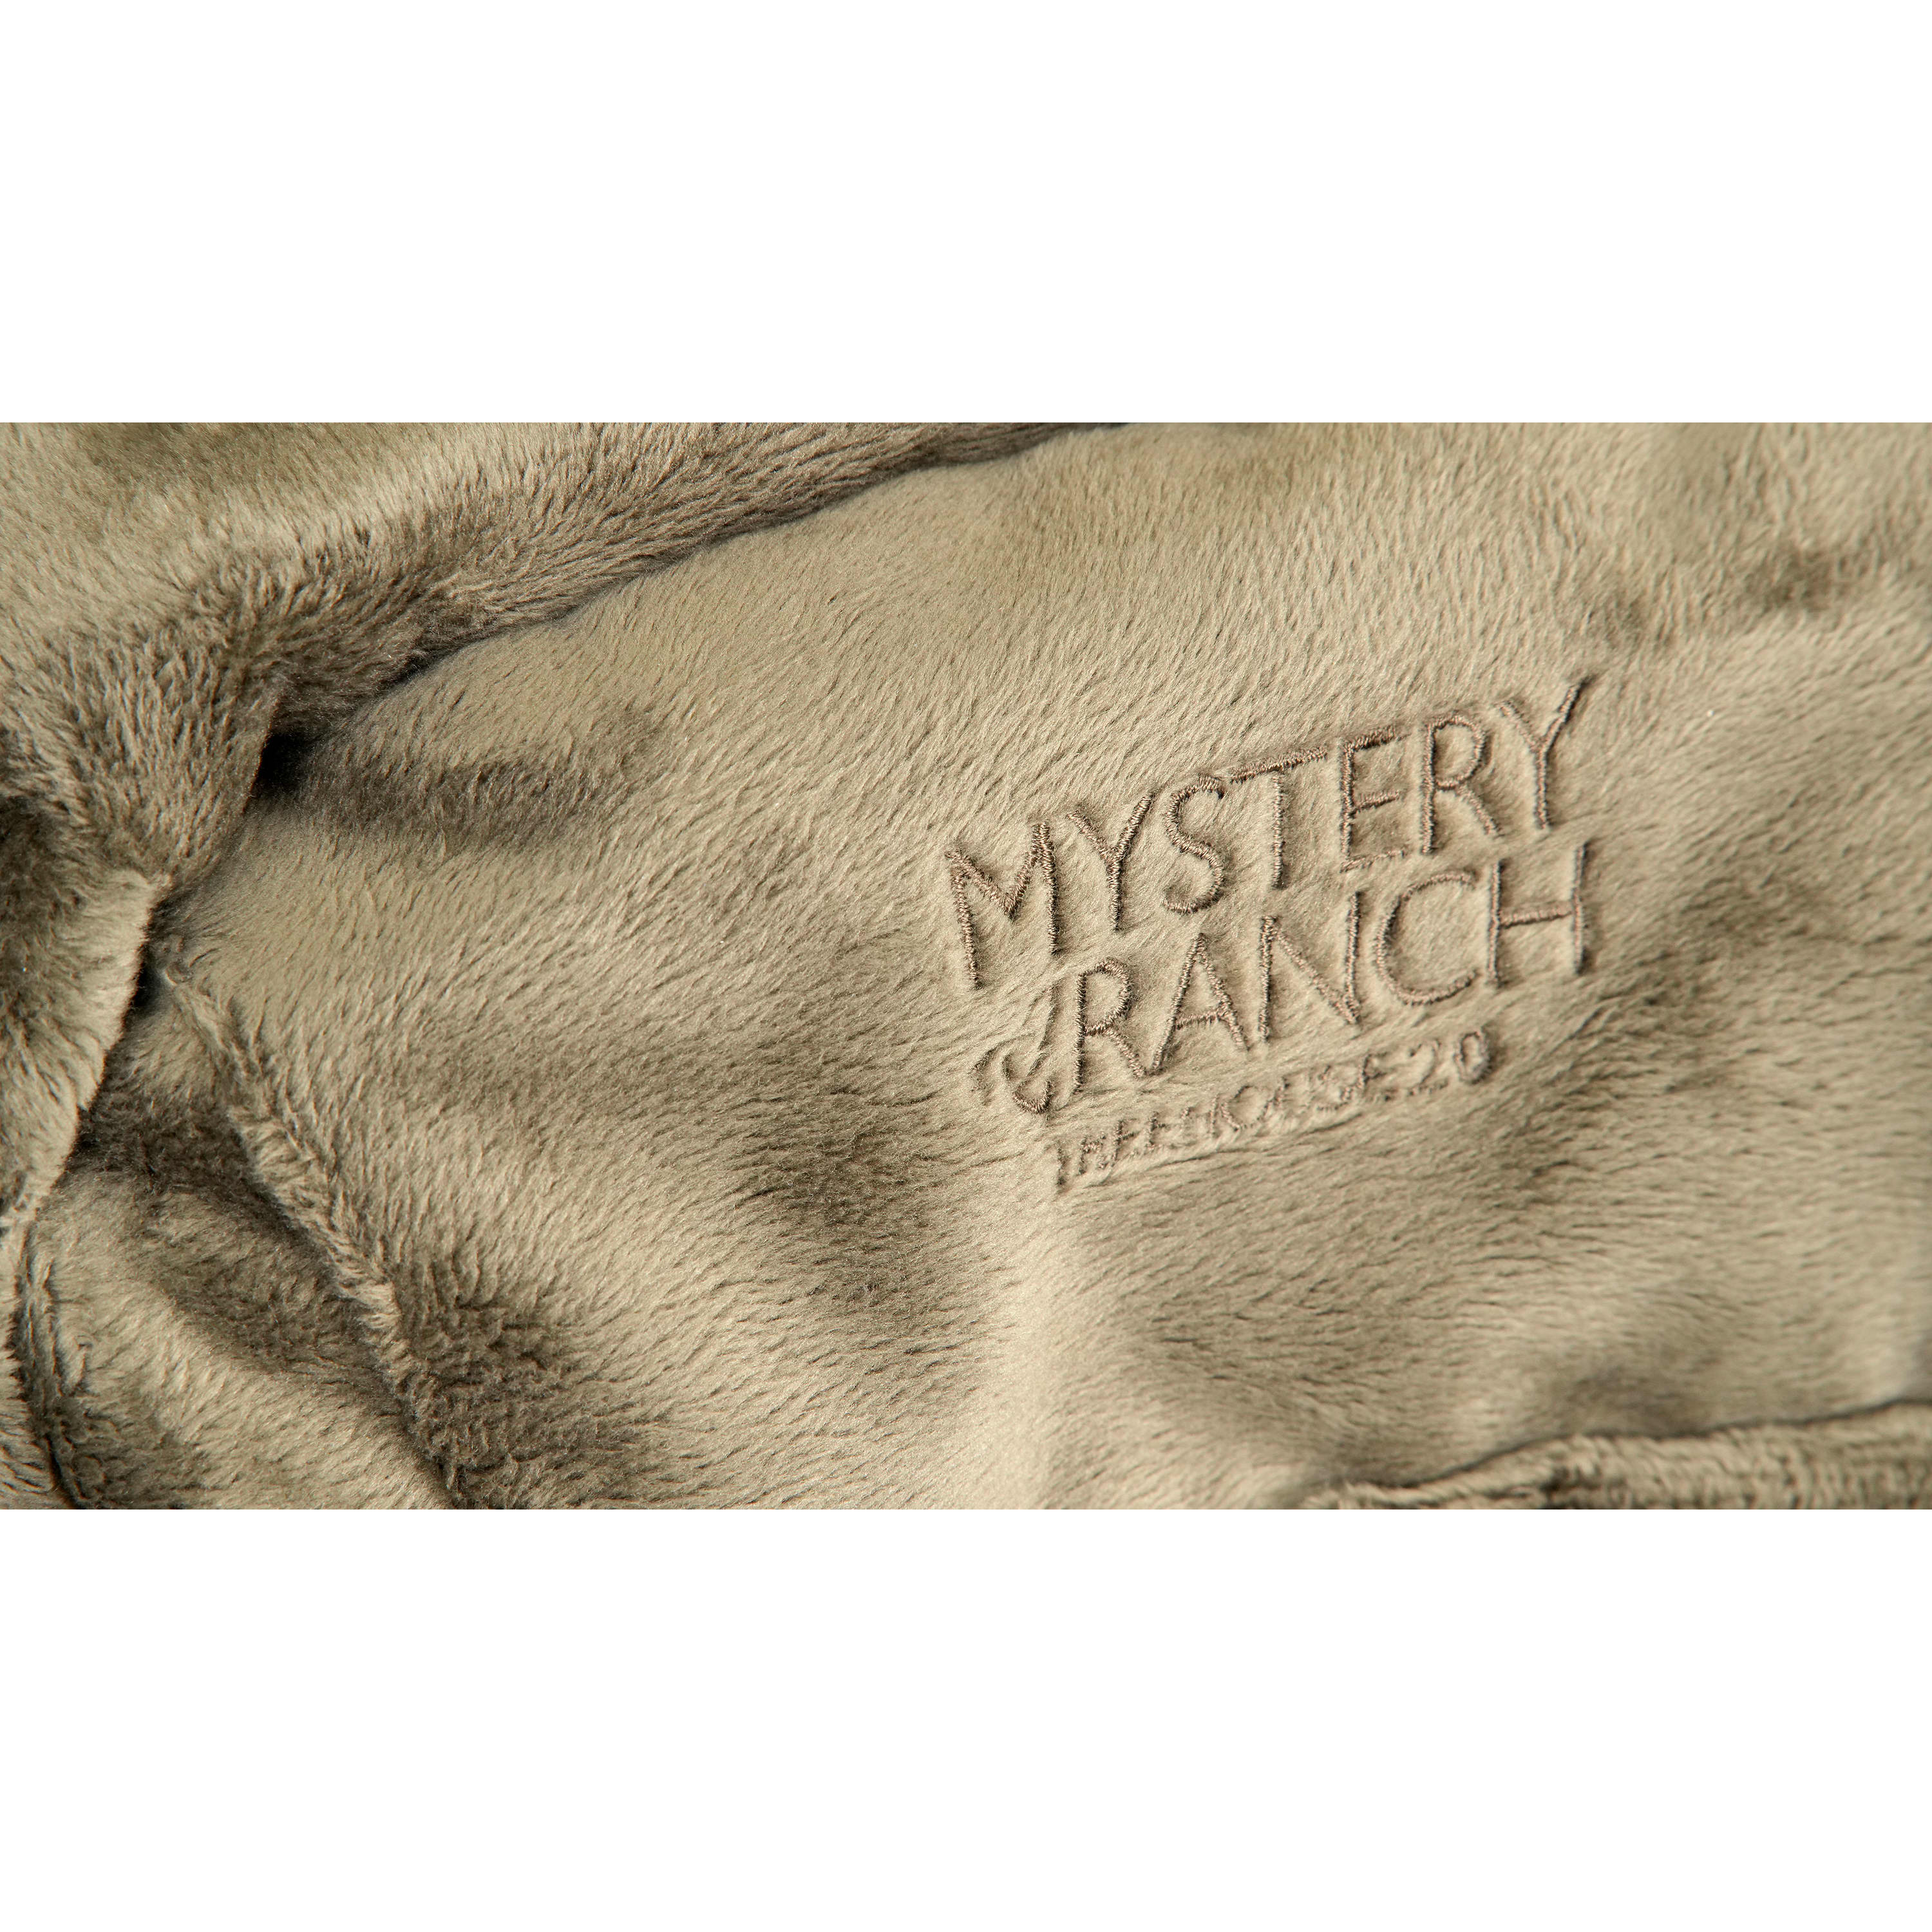 Mystery Ranch® Treehouse 20 Pack